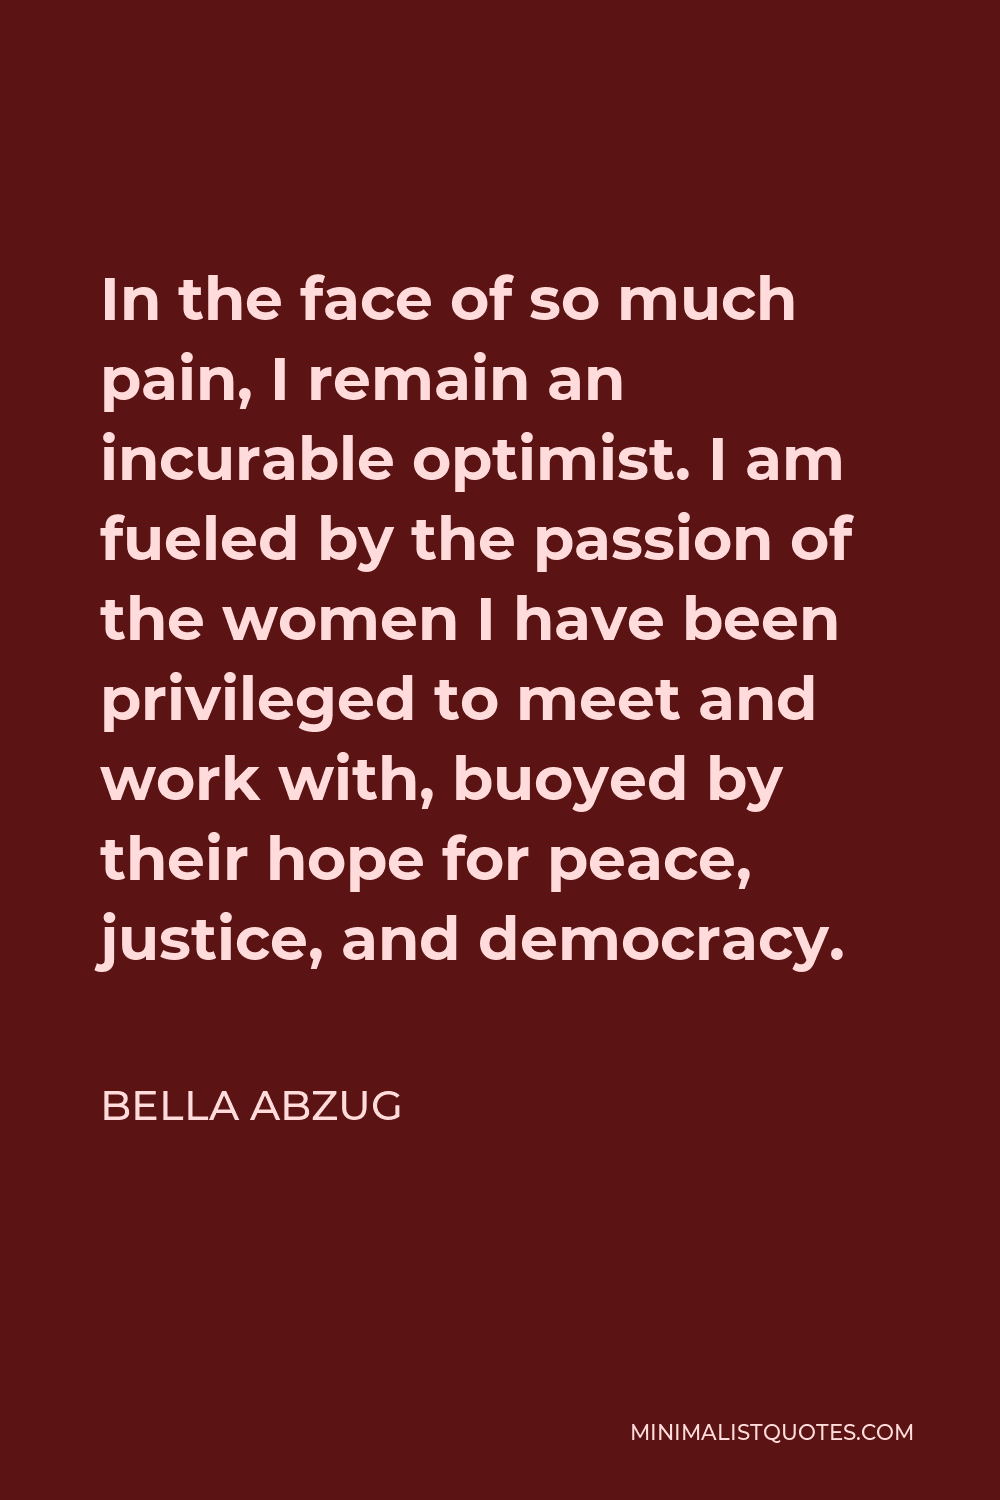 Bella Abzug Quote - In the face of so much pain, I remain an incurable optimist. I am fueled by the passion of the women I have been privileged to meet and work with, buoyed by their hope for peace, justice, and democracy.